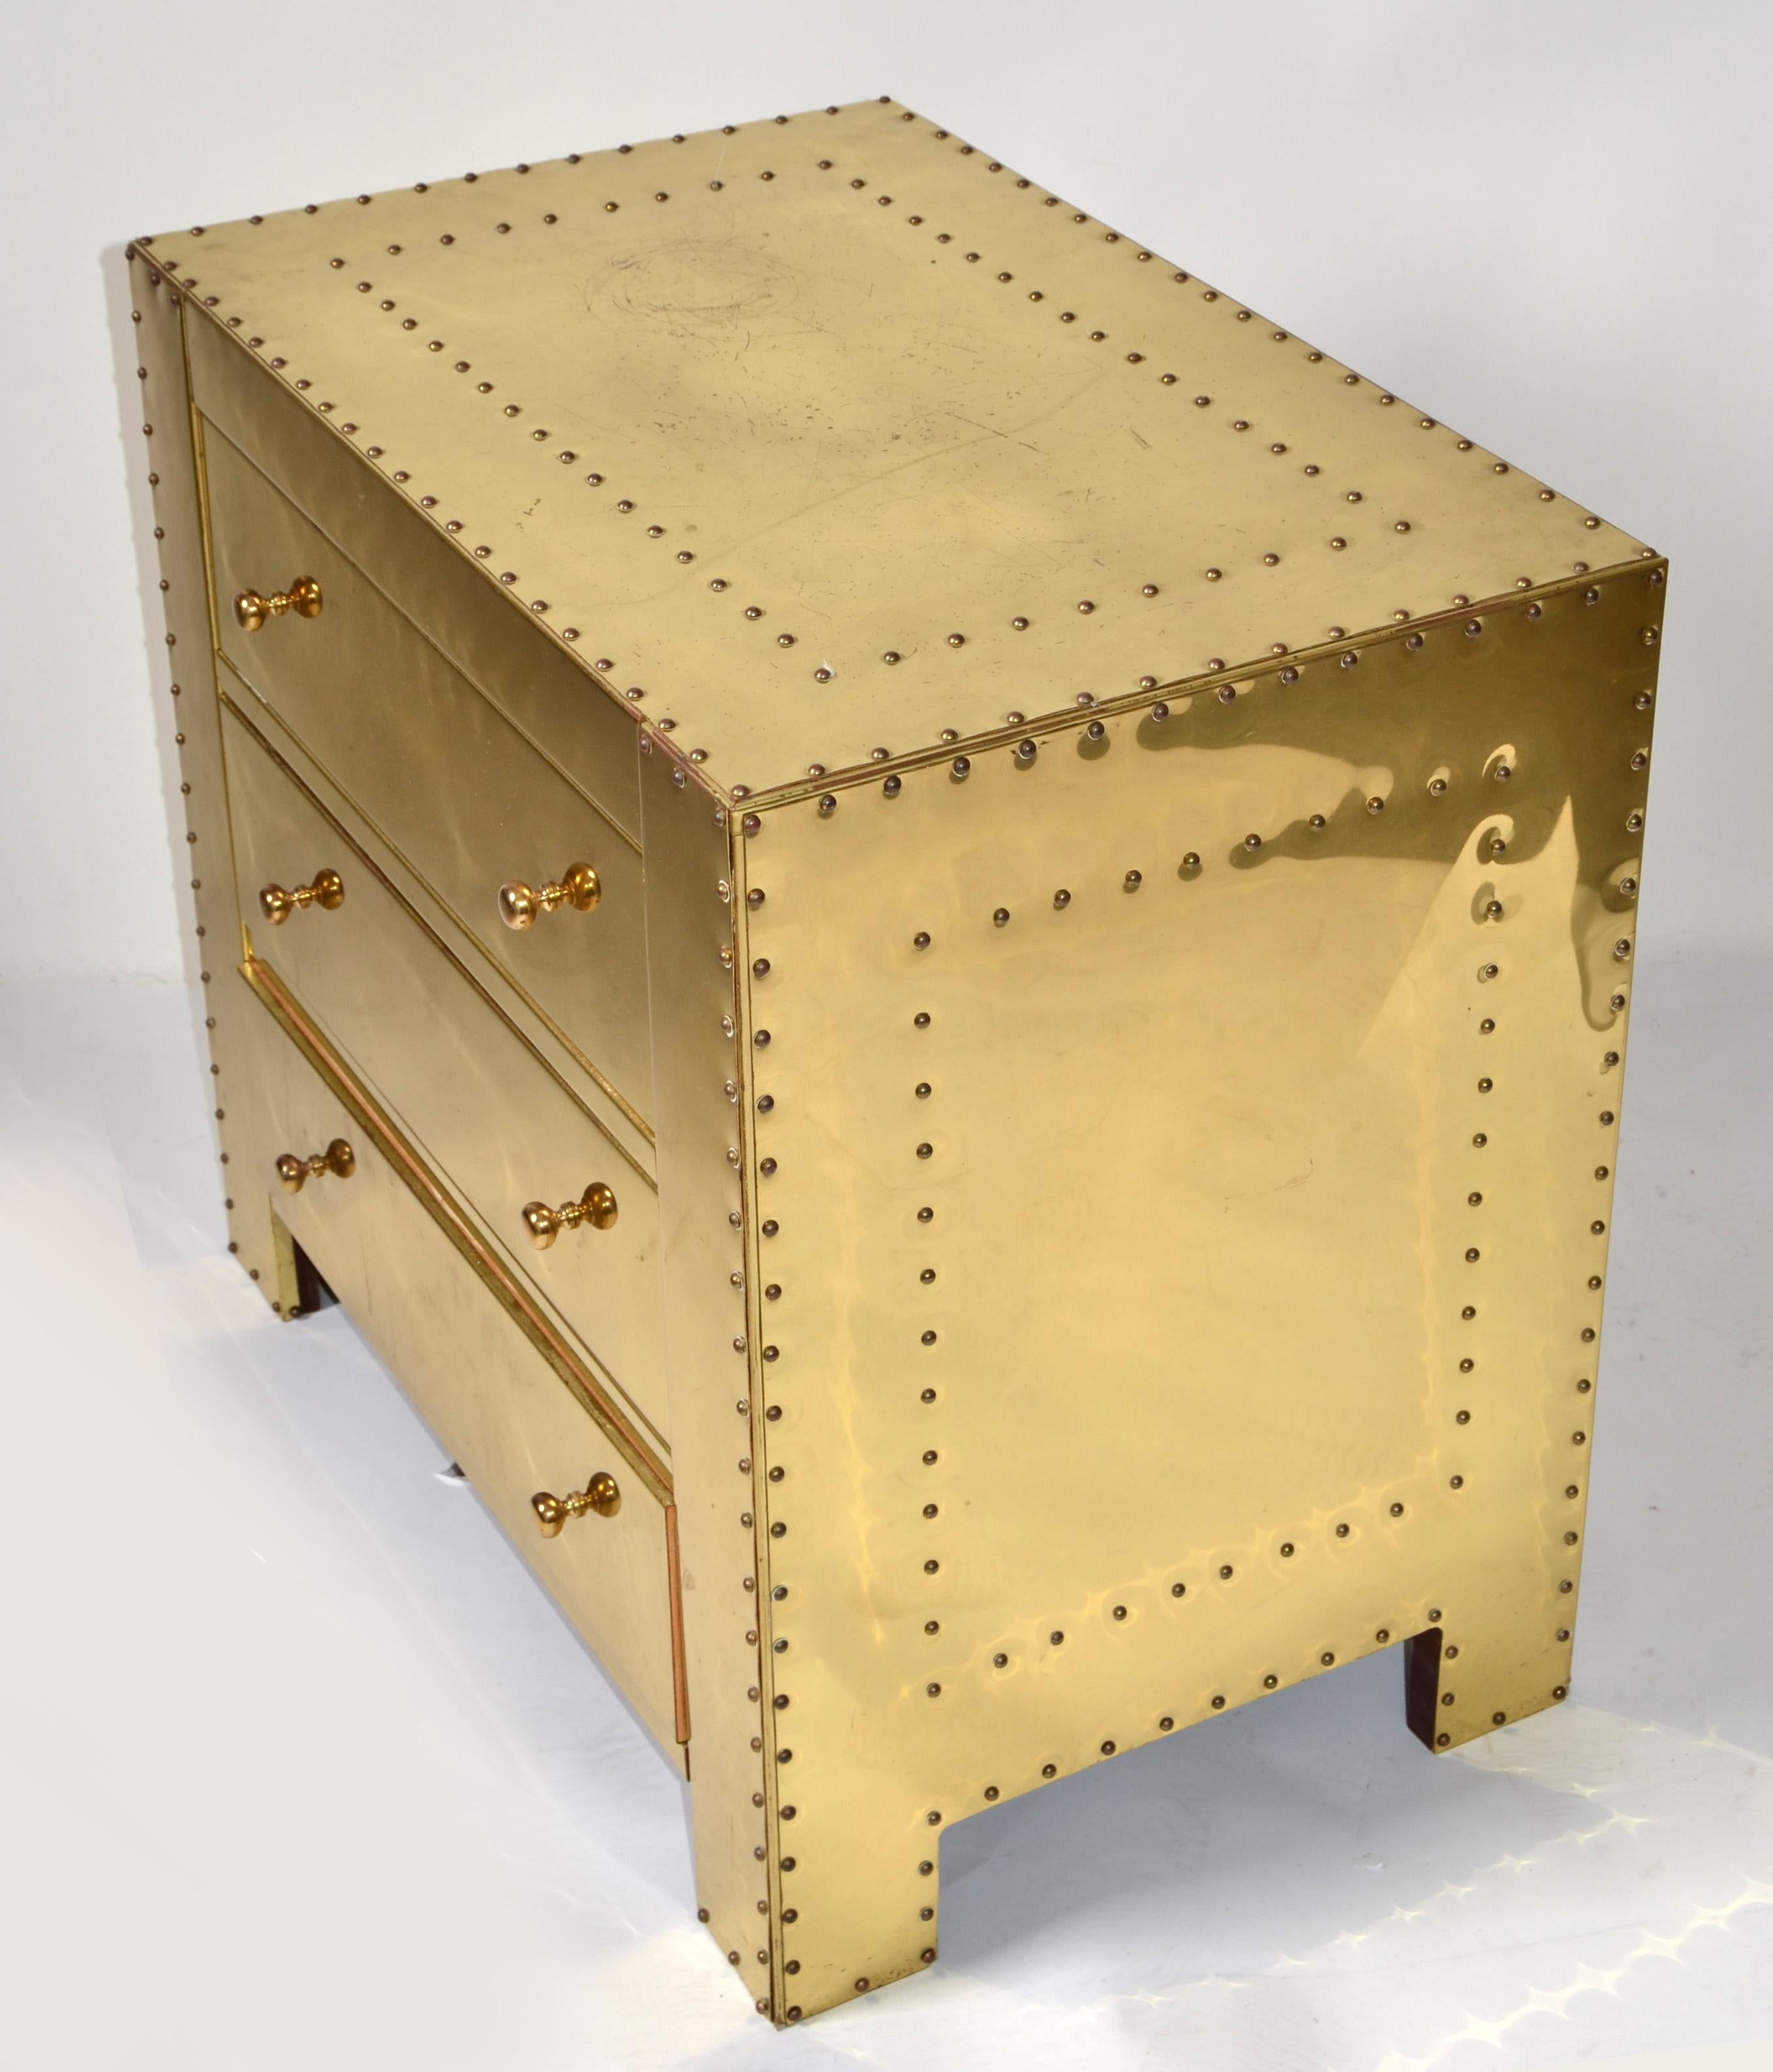 Vintage handsome Asian inspired three drawer riveted brass Nightstand, Bedside Table by Sarreid Ltd.
Small Chest of drawers with a mirrored brass exterior. Features a finish with brass nail head detail throughout. The substantial brass pulls easily